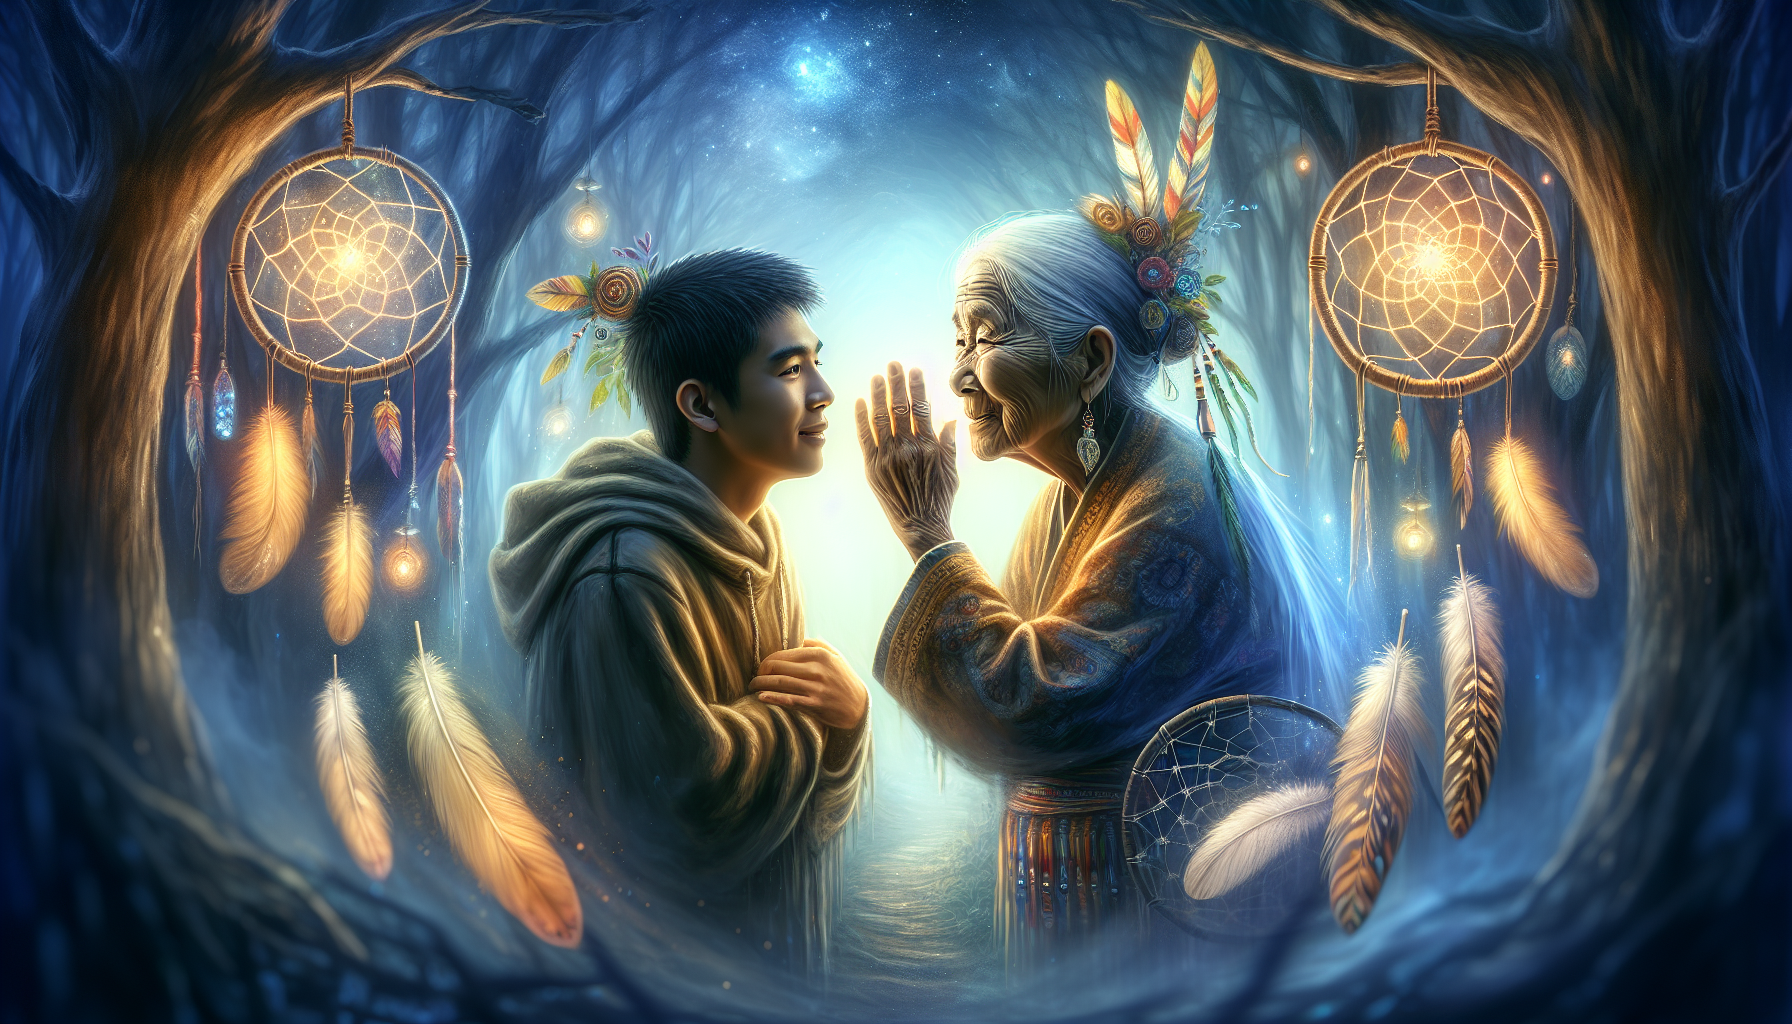 Create an ethereal and mystical digital painting of an elderly wise woman whispering ancient secrets into the left ear of a young listener, surrounded by a soft glow and symbolic icons like feathers a